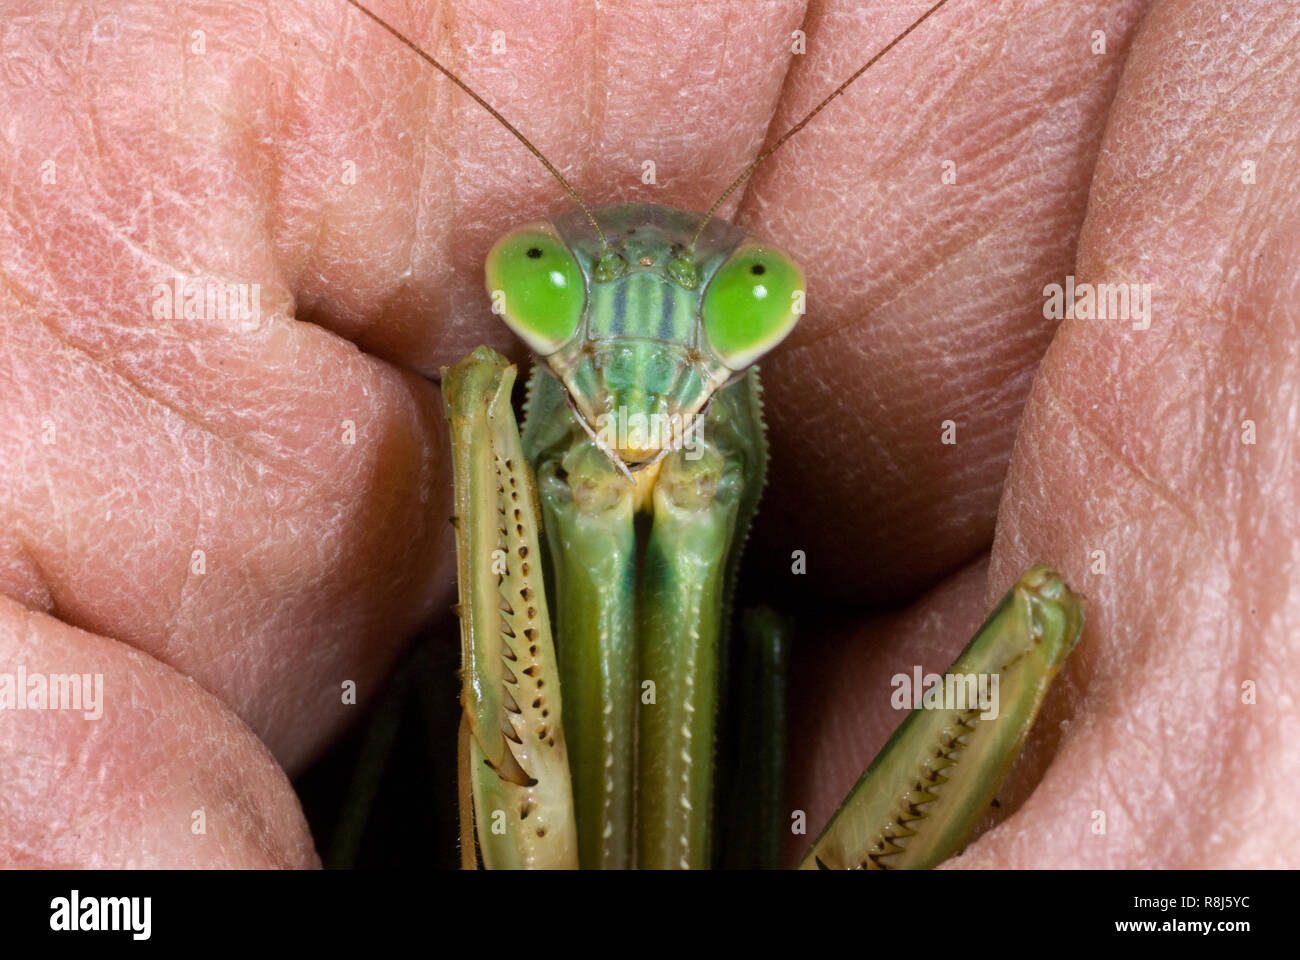 European mantis (Mantis religiosa) held in hand to show scale. Praying mantids don't bite when held, but their powerful front less, covered with sharp Stock Photo